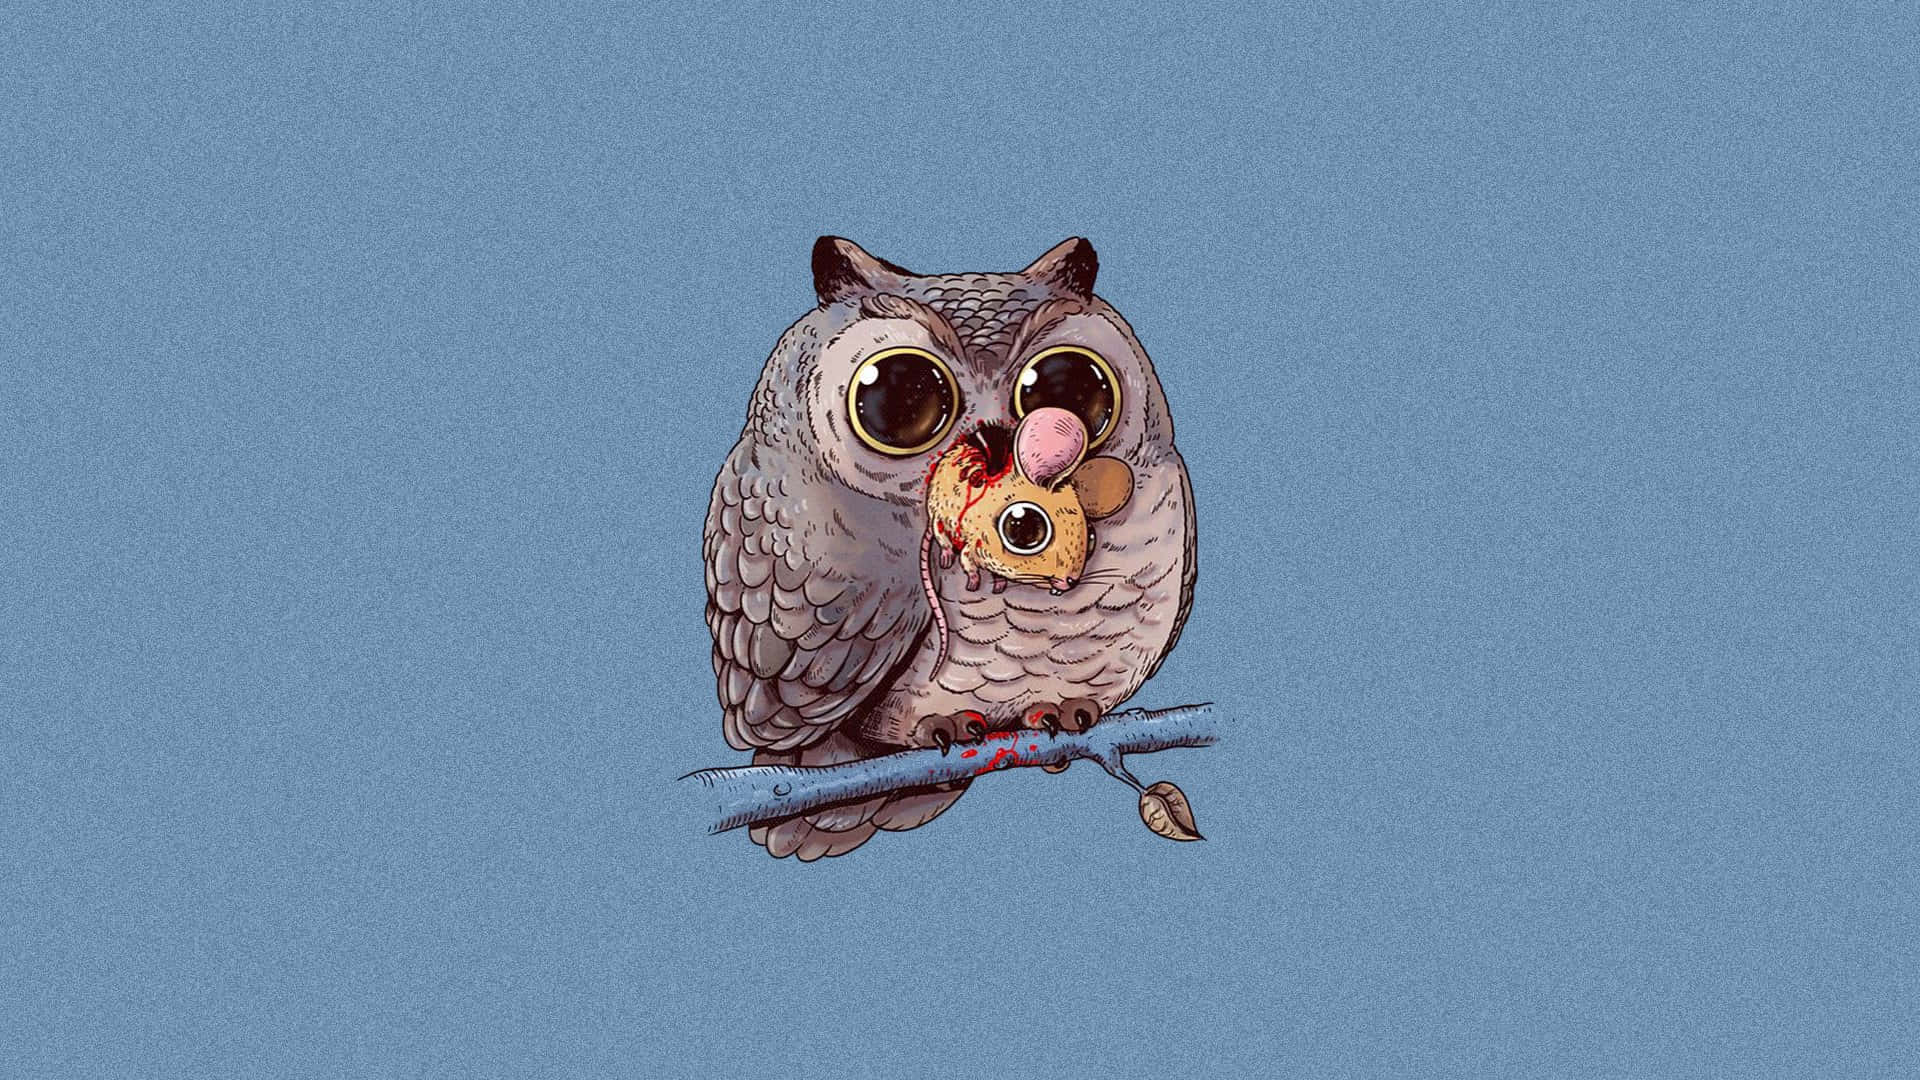 Inadequate Owl Catches A Rat Wallpaper